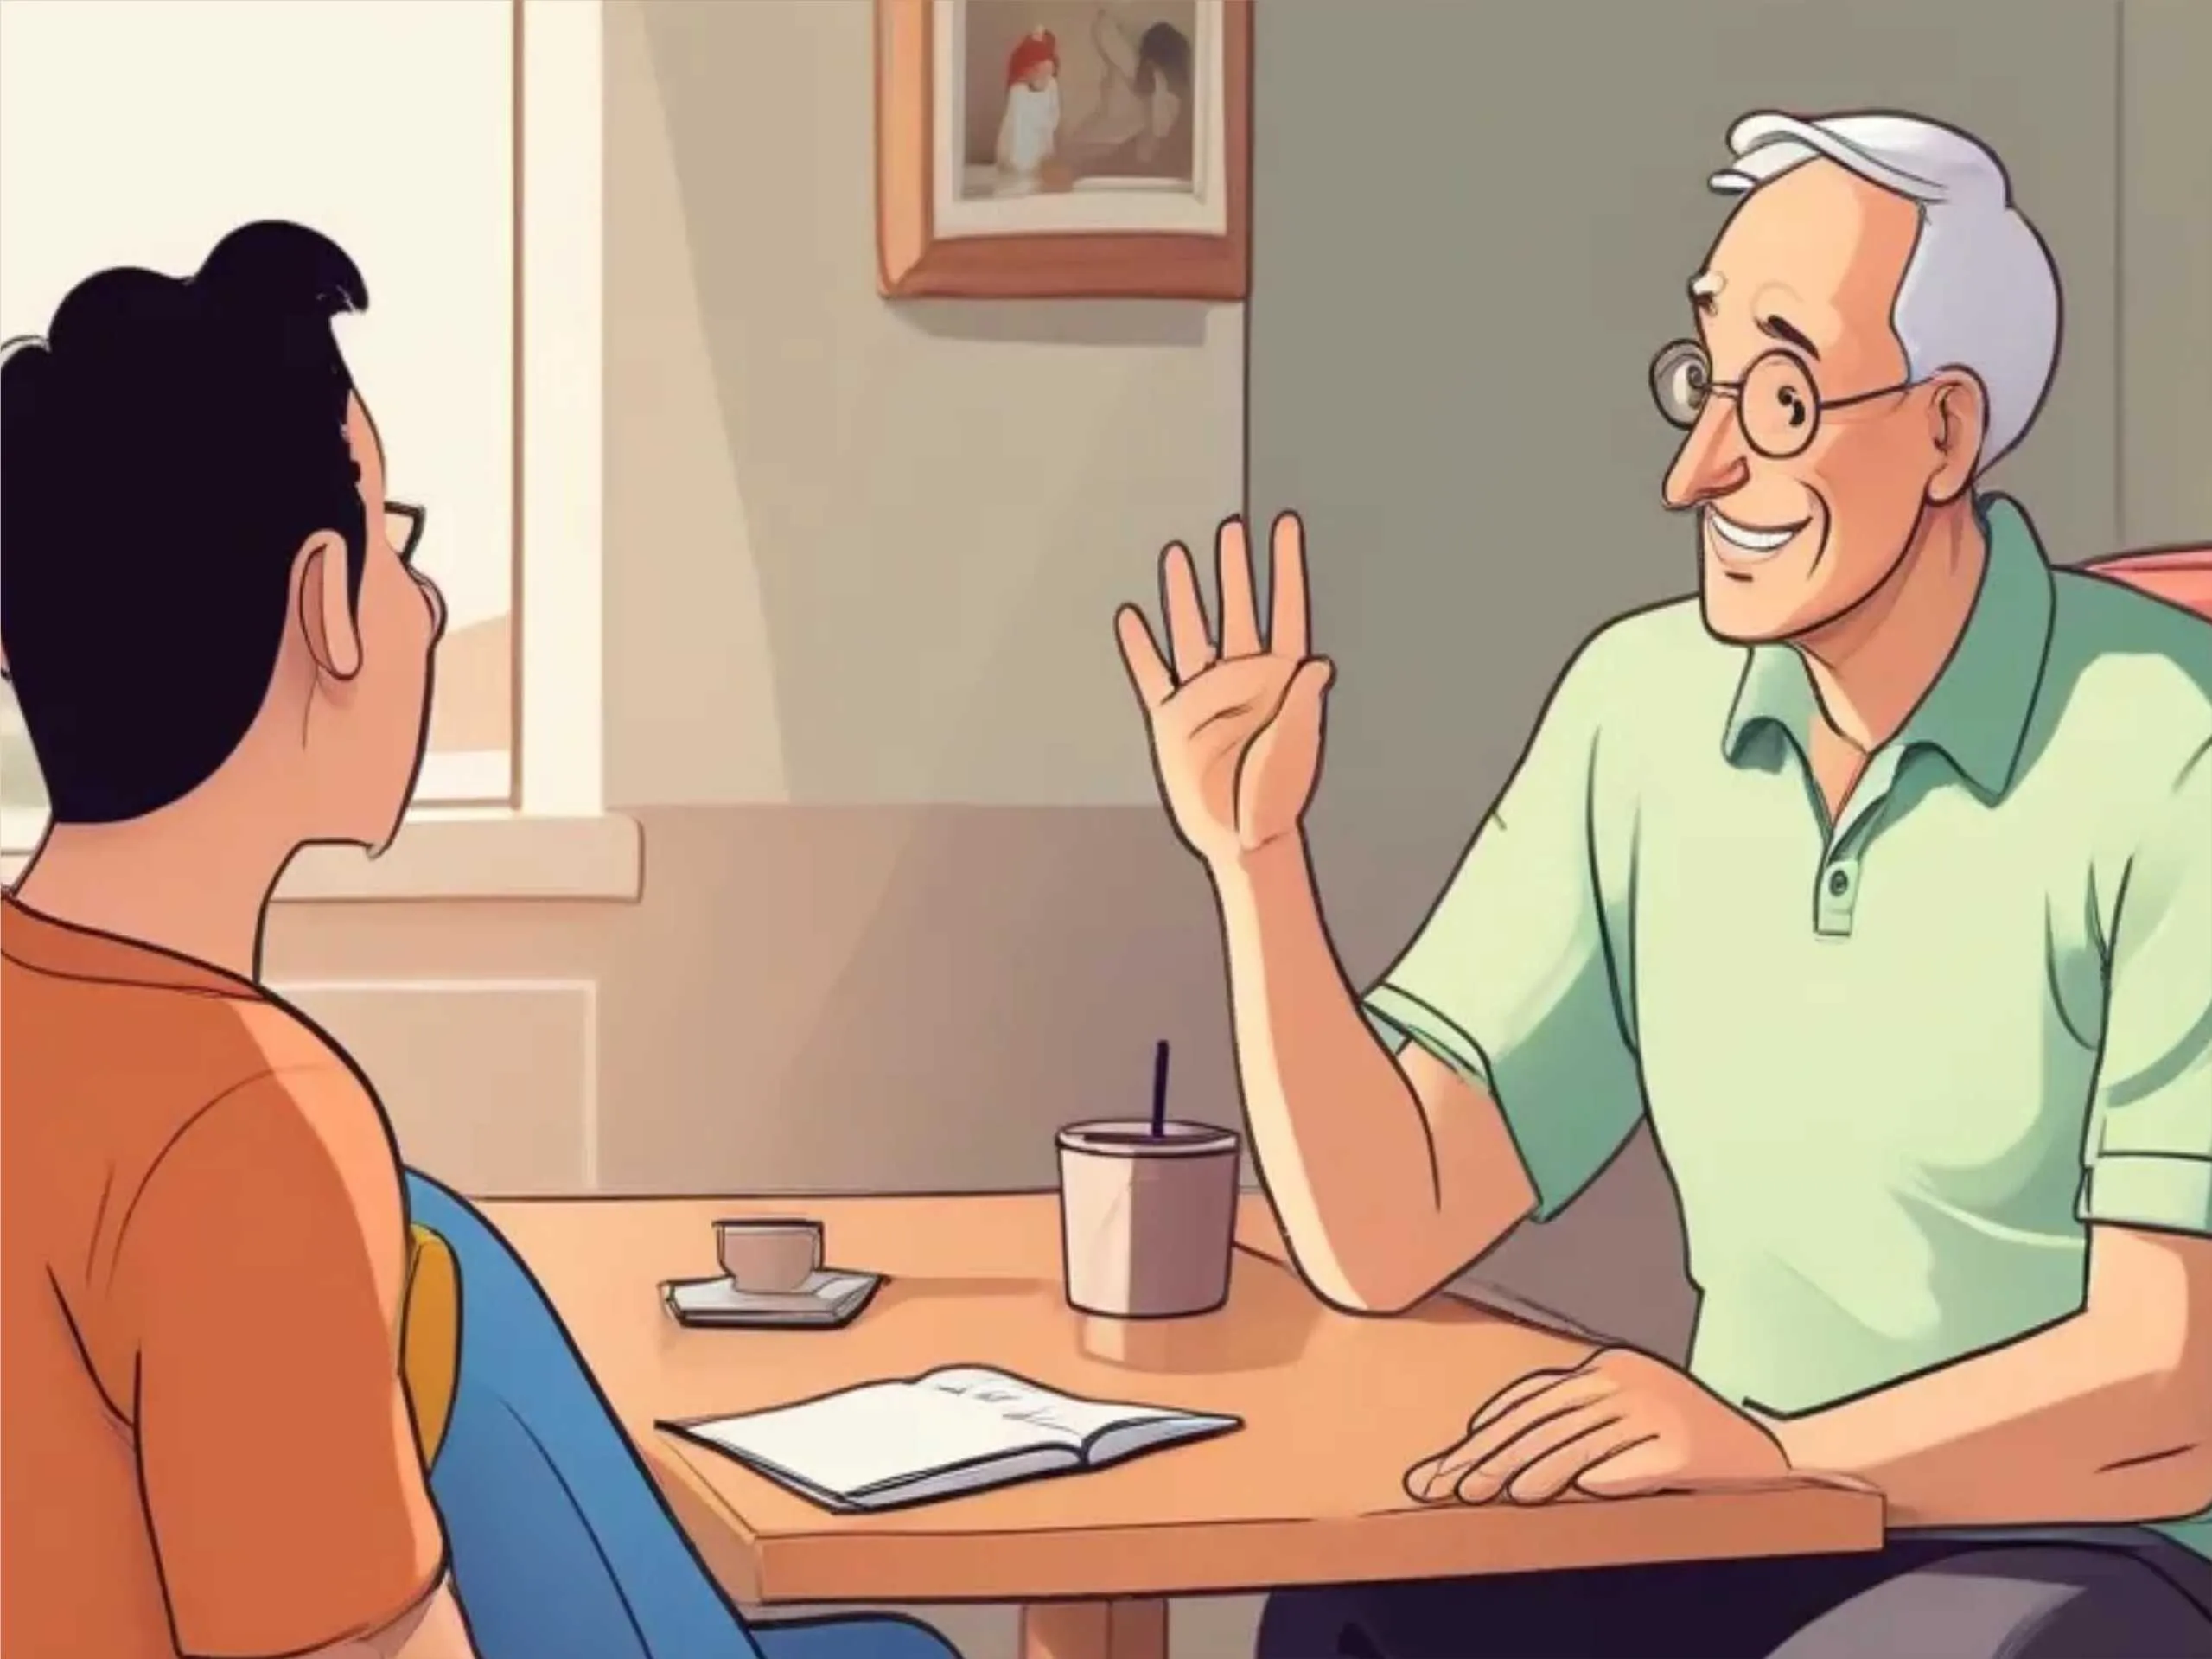 Father and son talking cartoon image